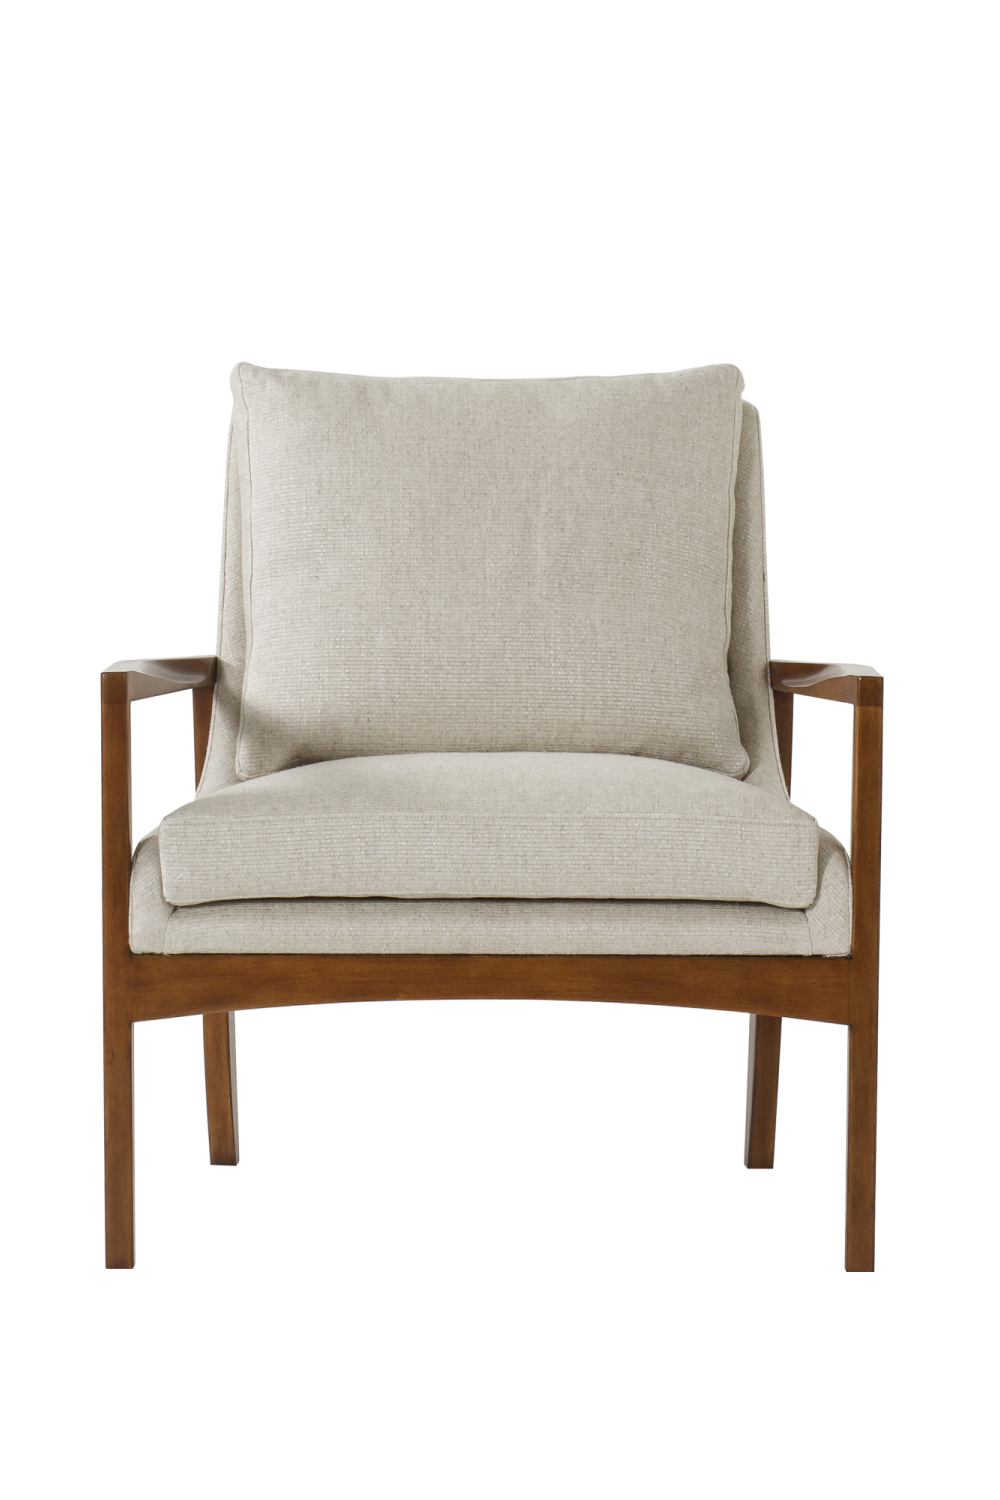 Beech Frame Natural Upholstery Chair | Andrew Martin Tarlow | OROA